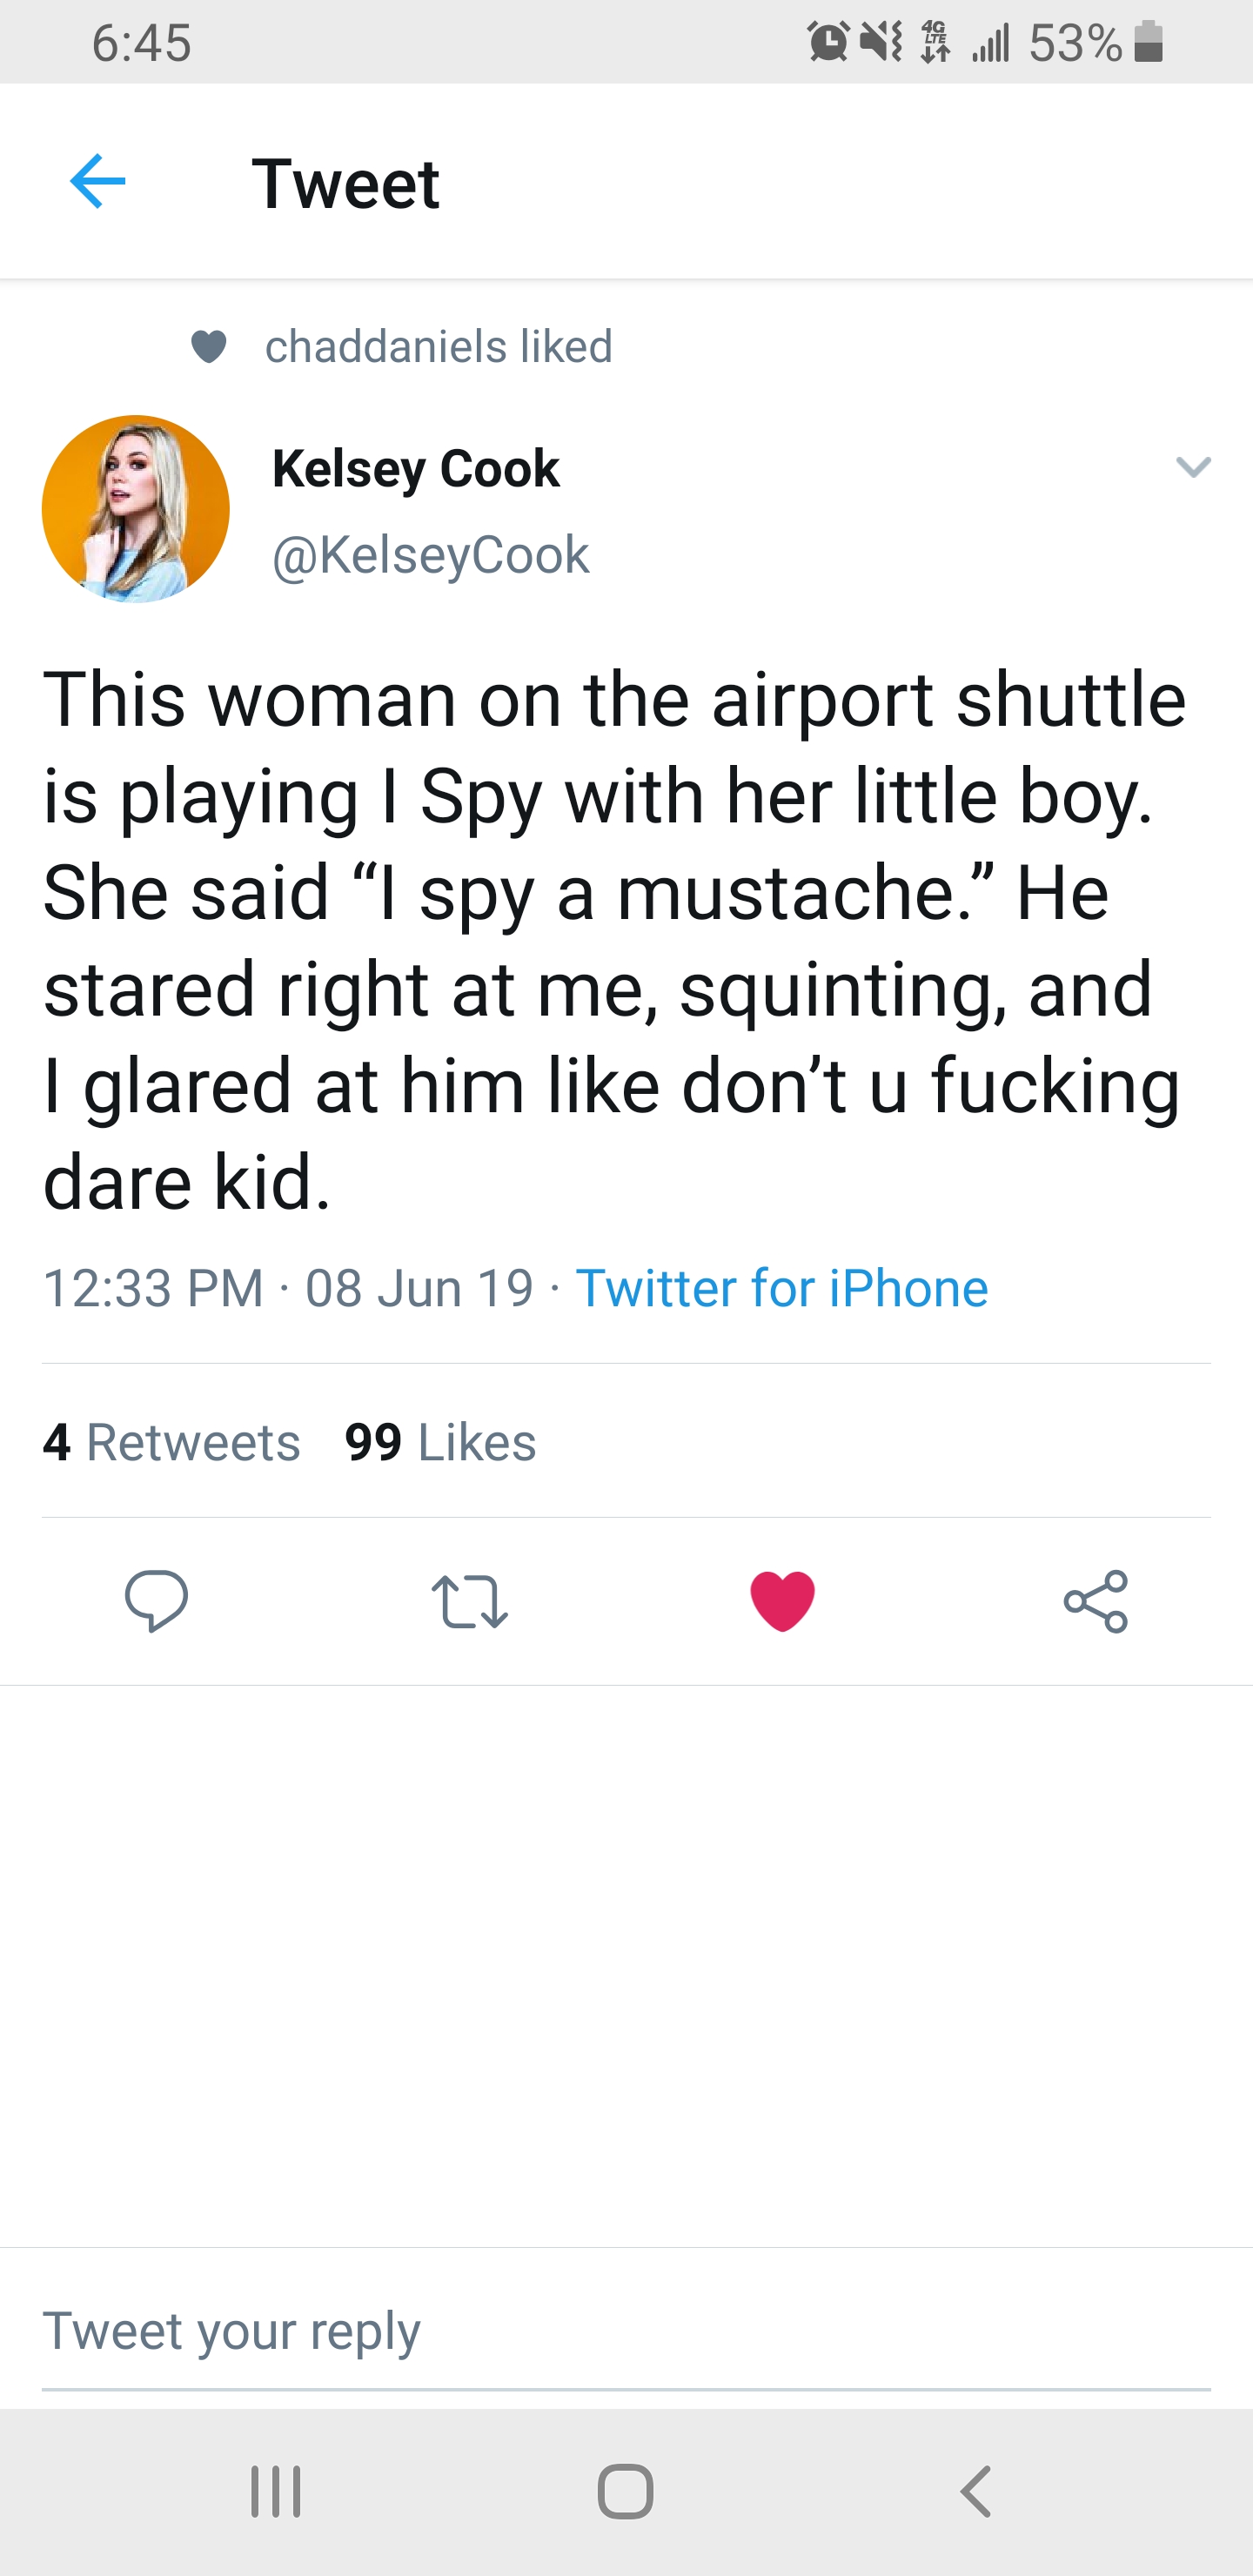 savage meme screenshot - 58%. Tweet chaddaniels d Kelsey Cook This woman on the airport shuttle is playing 1 Spy with her little boy. She said "I spy a mustache." He stared right at me, squinting, and I glared at him don't u fucking dare kid. 08 Jun 19. T